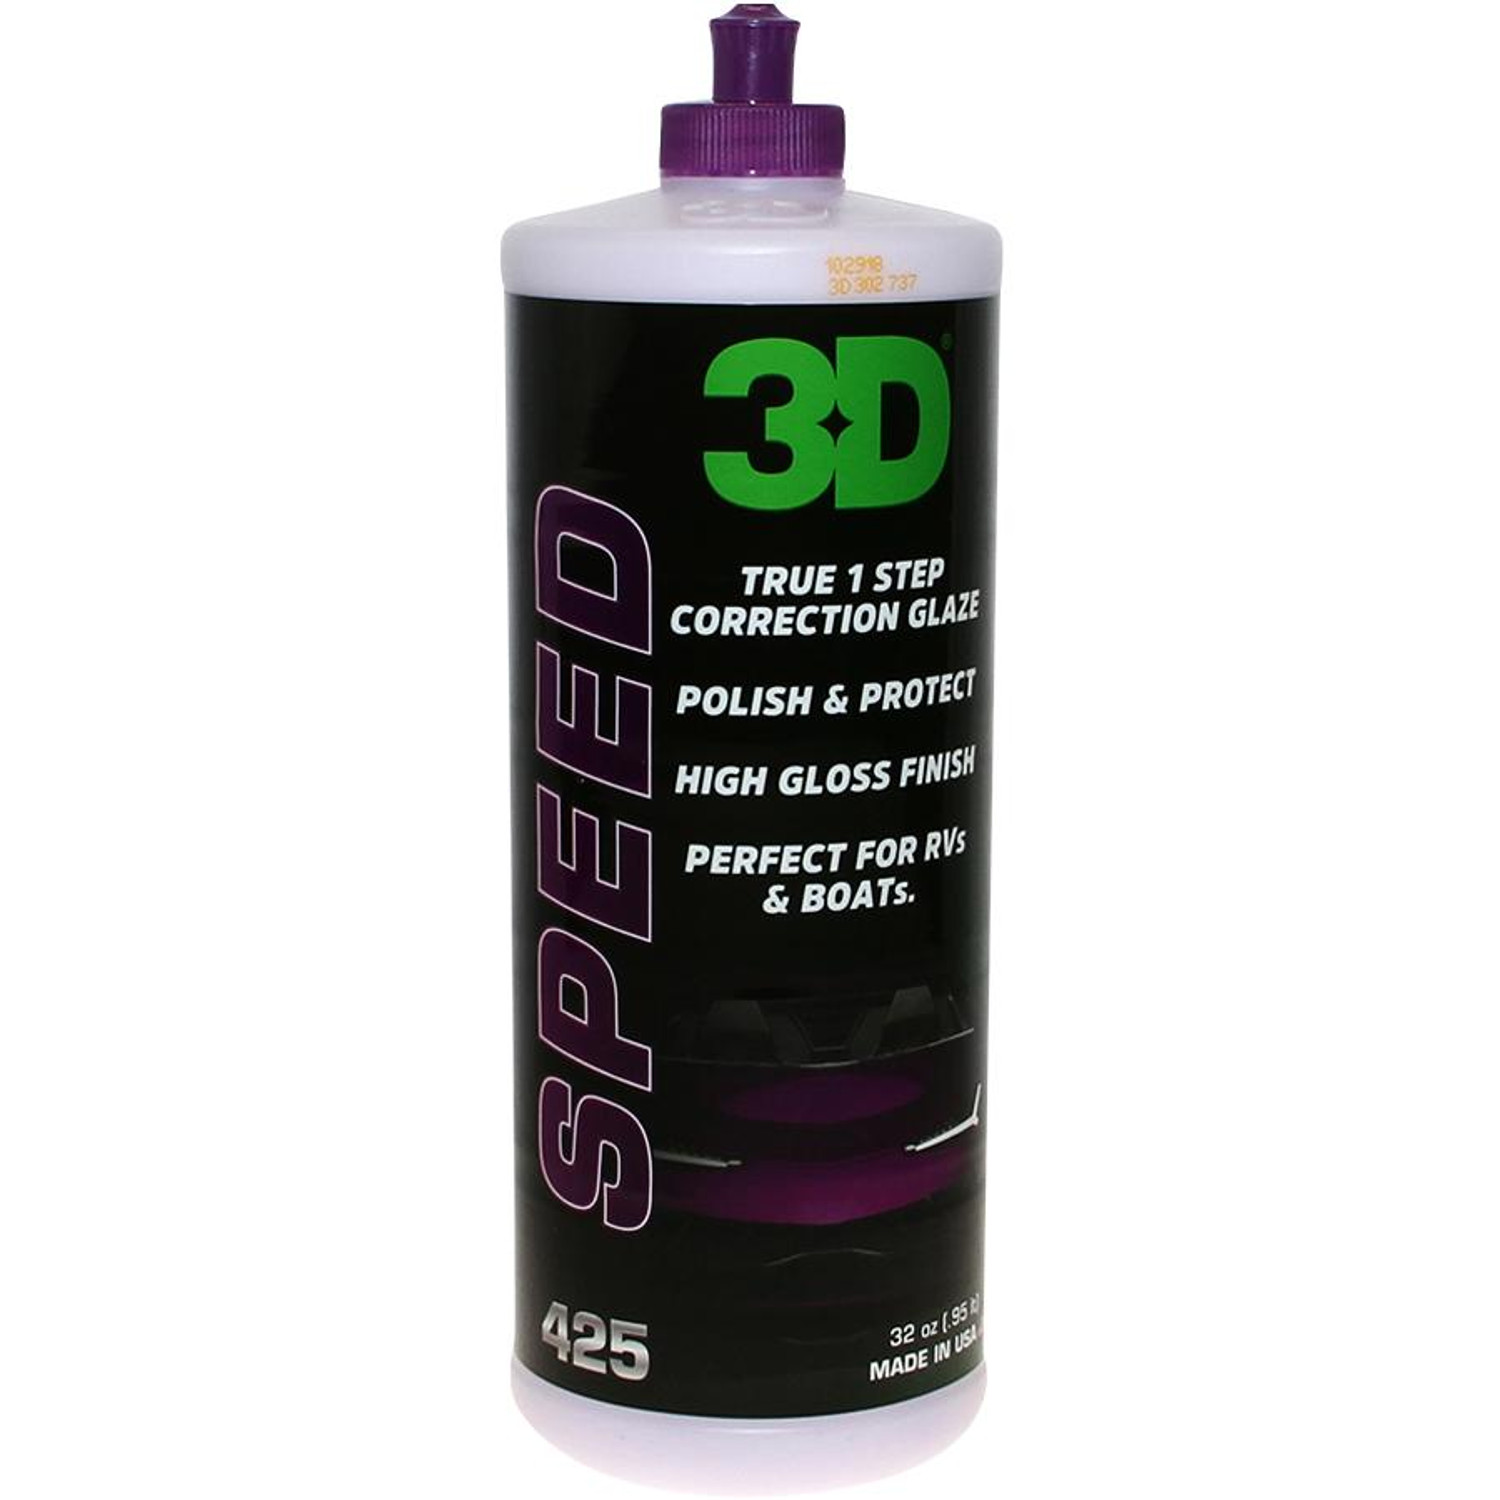 3D Speed - All-In-One Polish & Wax 32oz